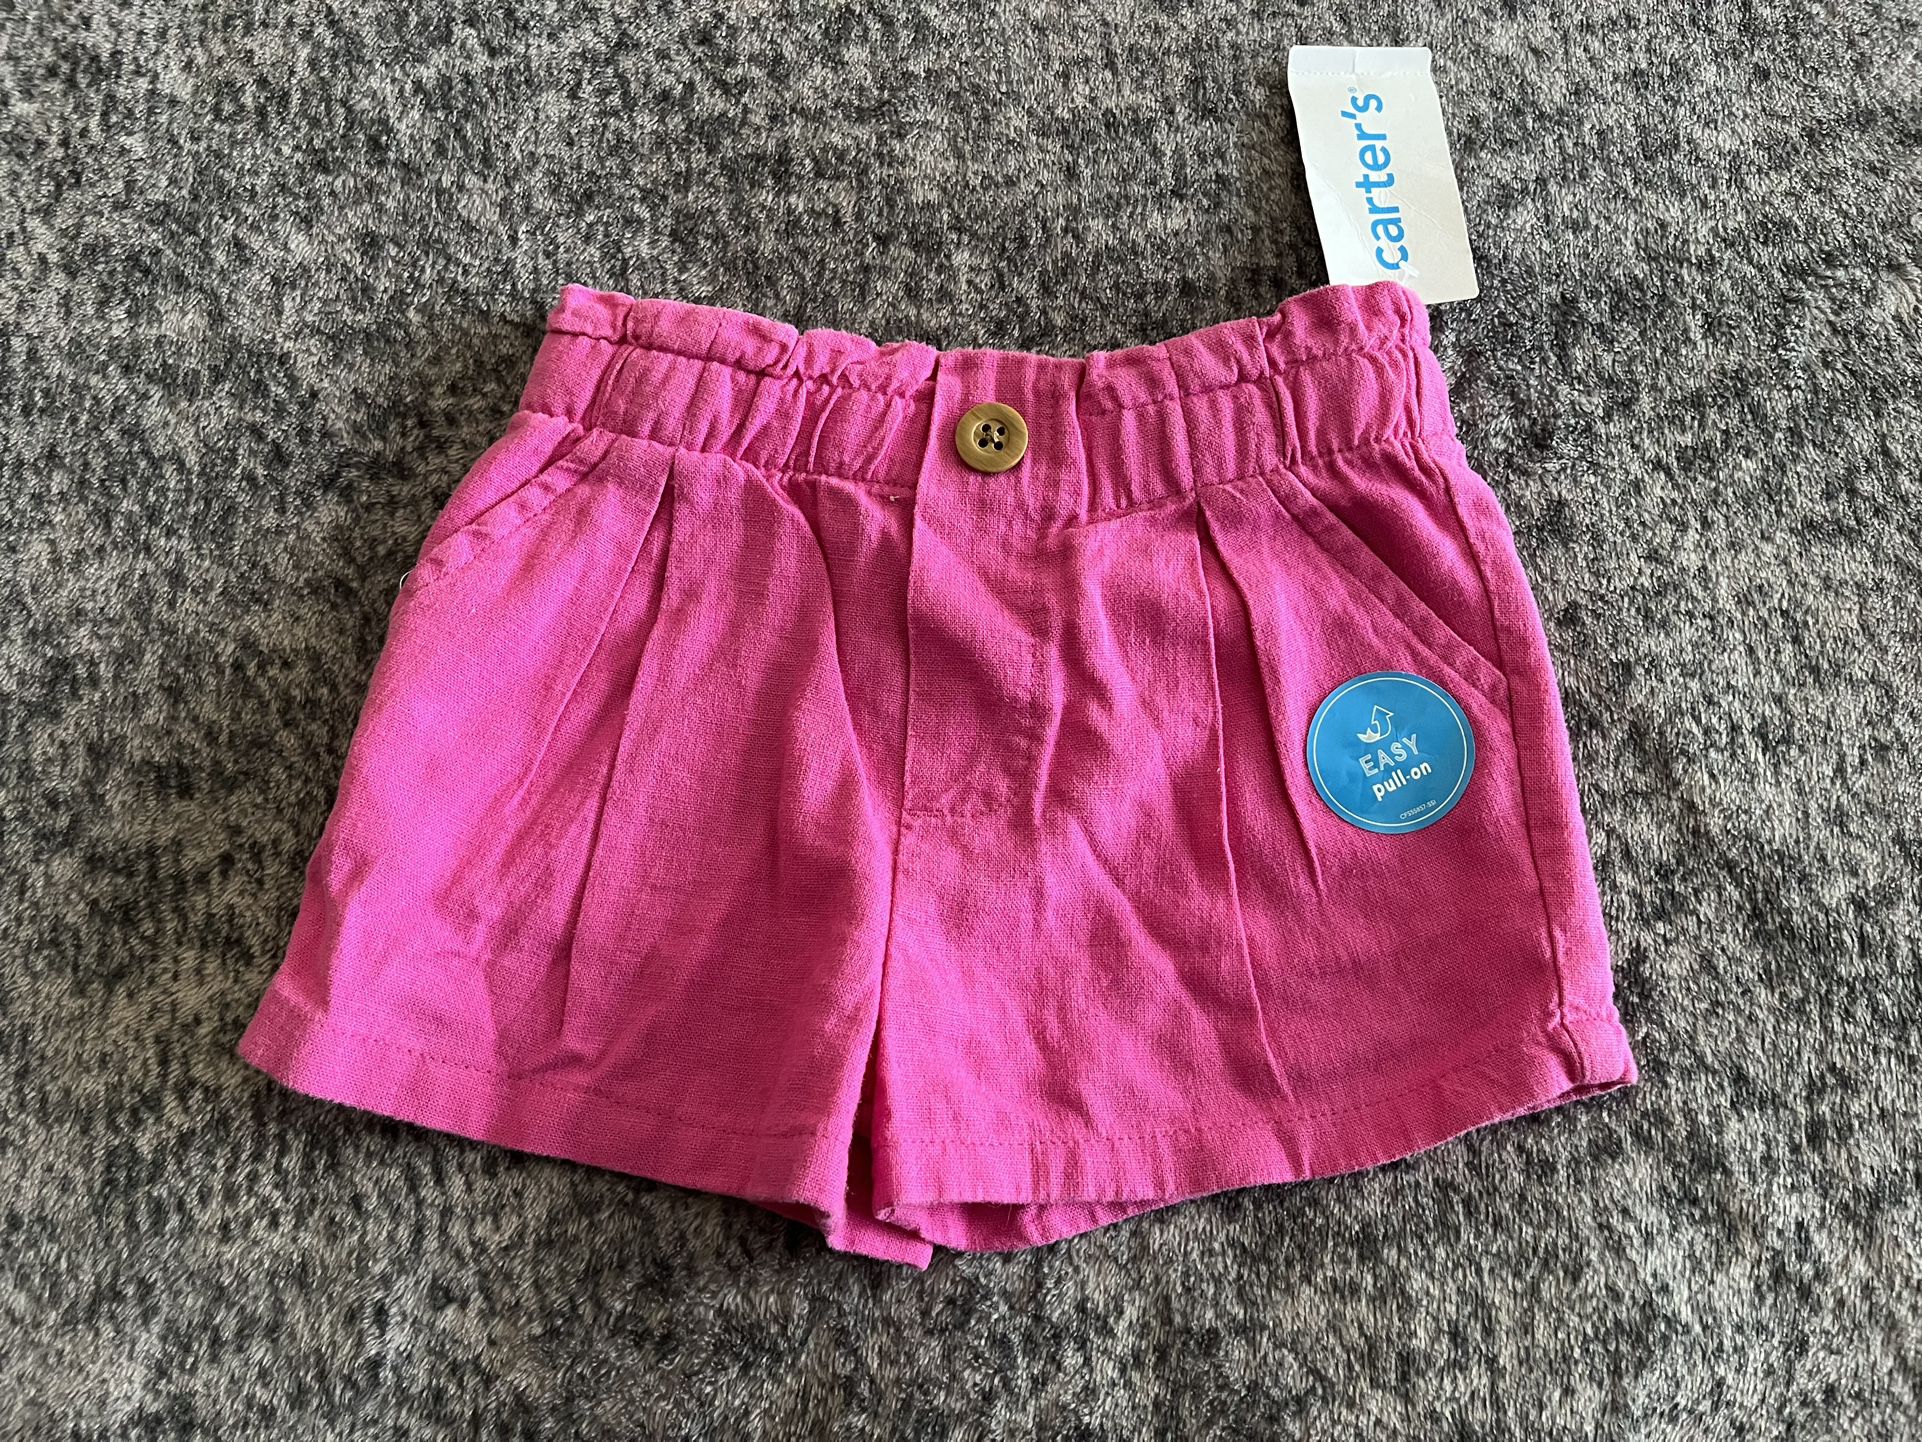 Super Cute Carter’s Baby Girl Paperbag Pleated Shorts Size 12M NWT